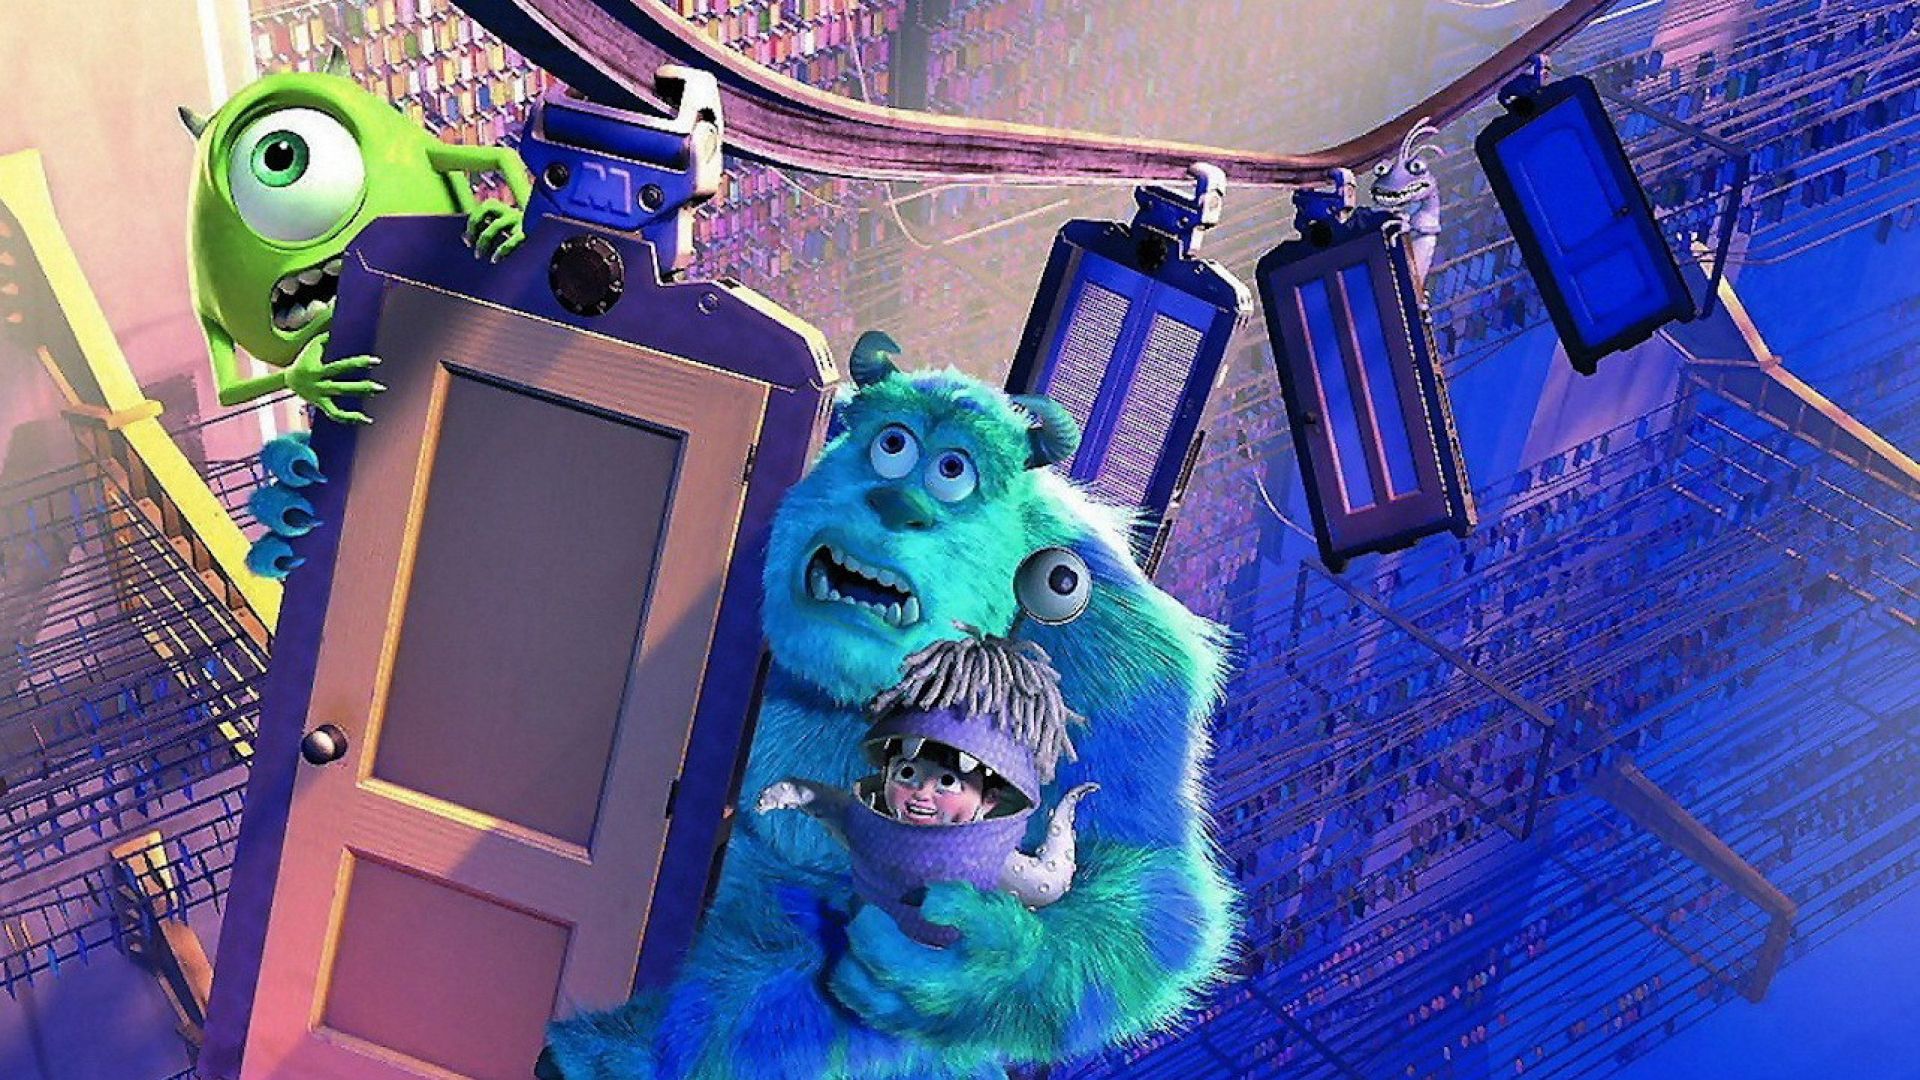 Monsters Inc Wallpapers High Quality | Download Free